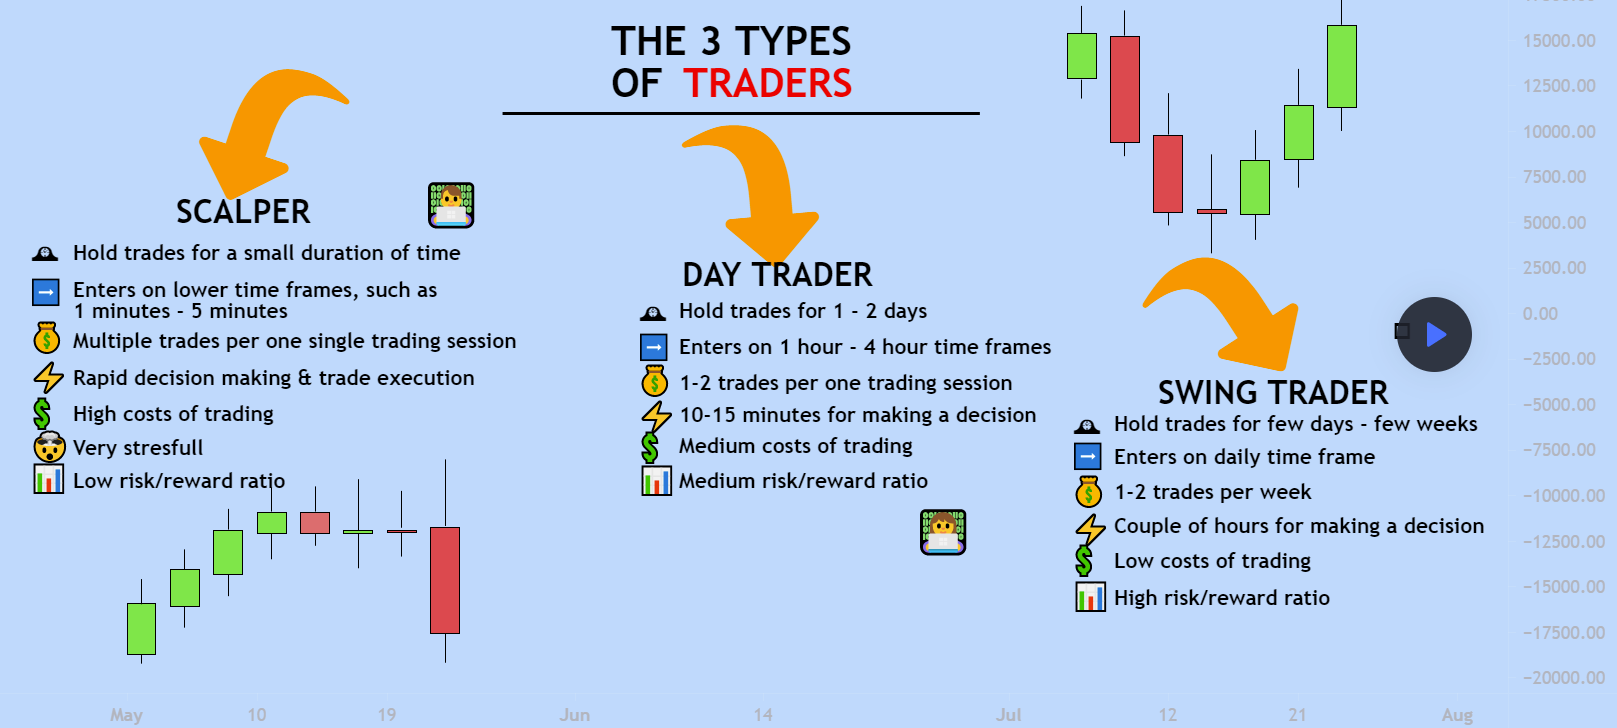 The 3 Types of Traders